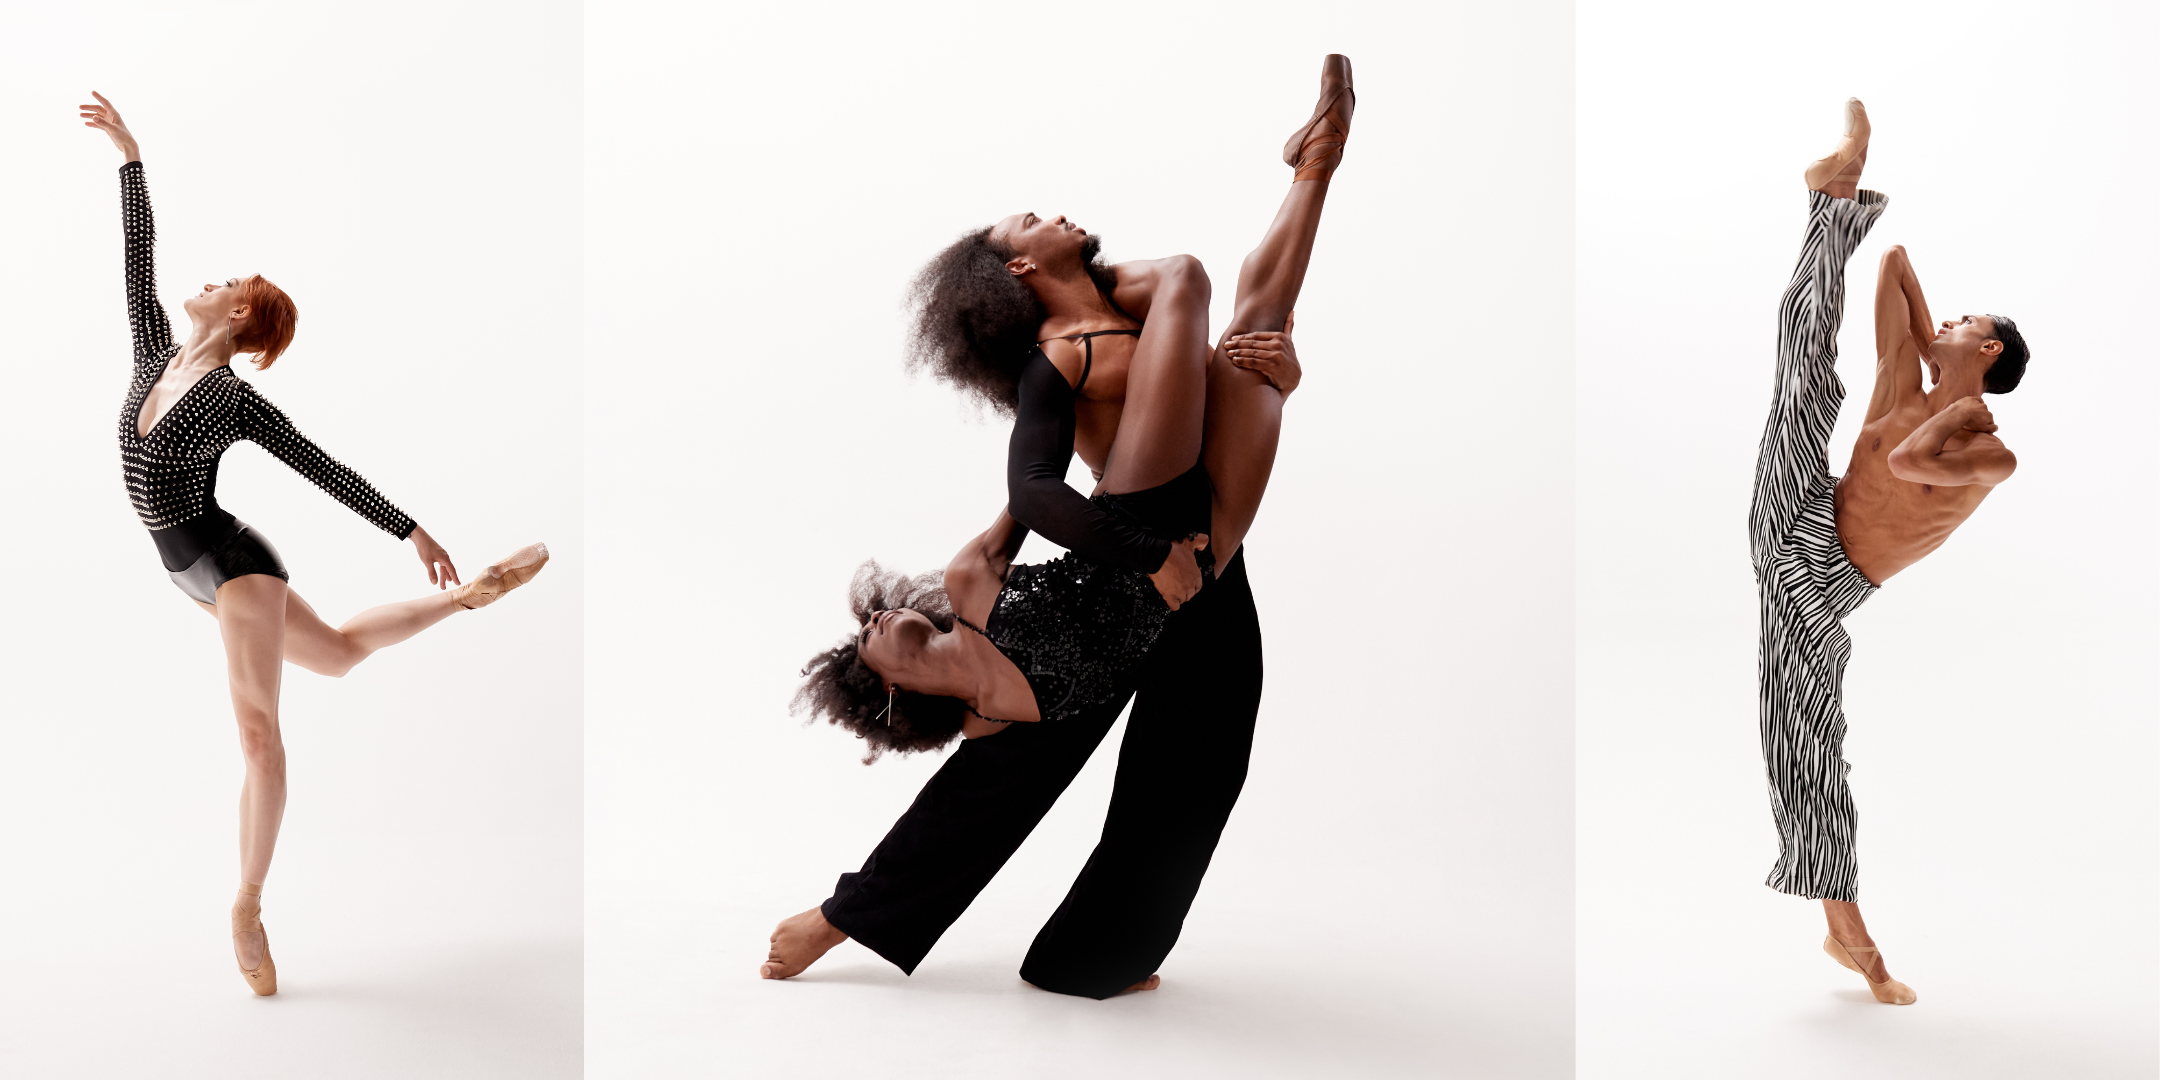 Three photos positioned side-by-side: Jillian Davis, April Watson and Joe Gonzalez, and Alberto Andrade pose in contemporary ballet movement.